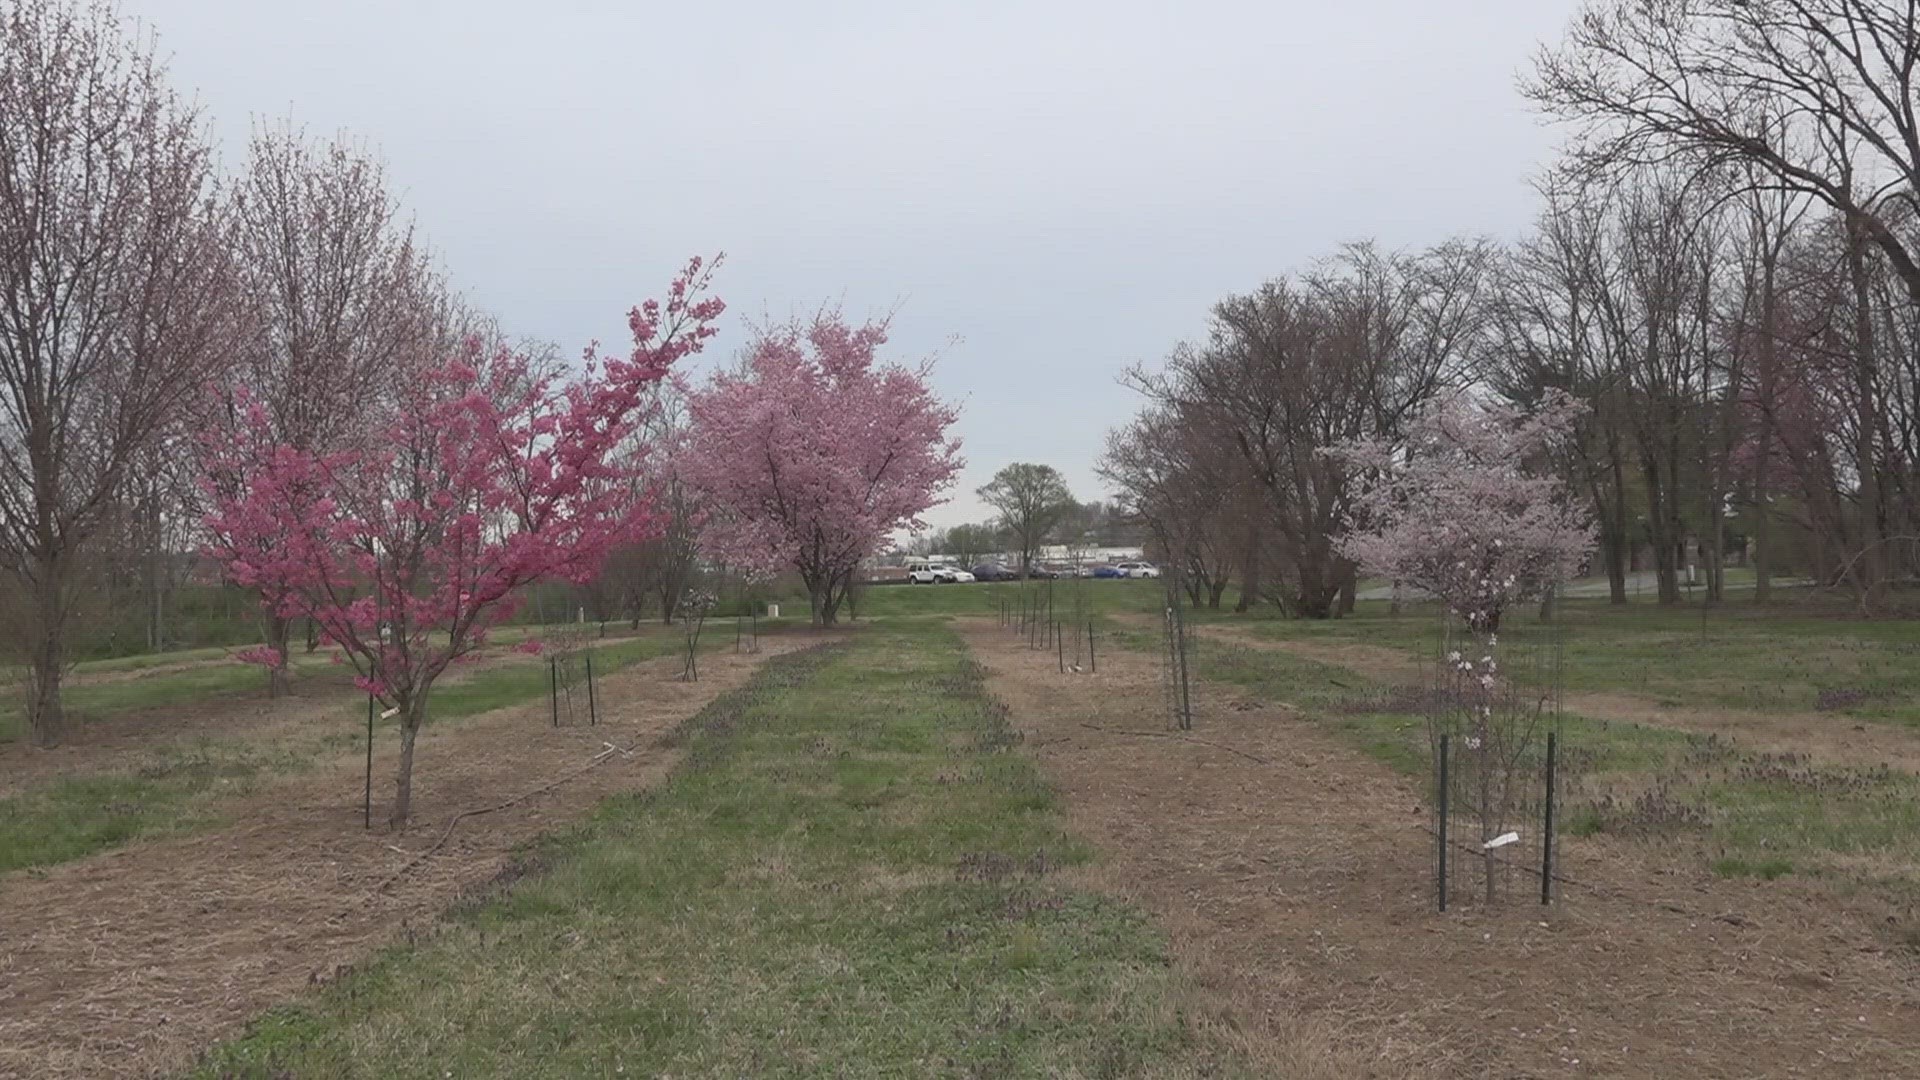 The National Arboretum is home to over 900 varieties of cherry trees.